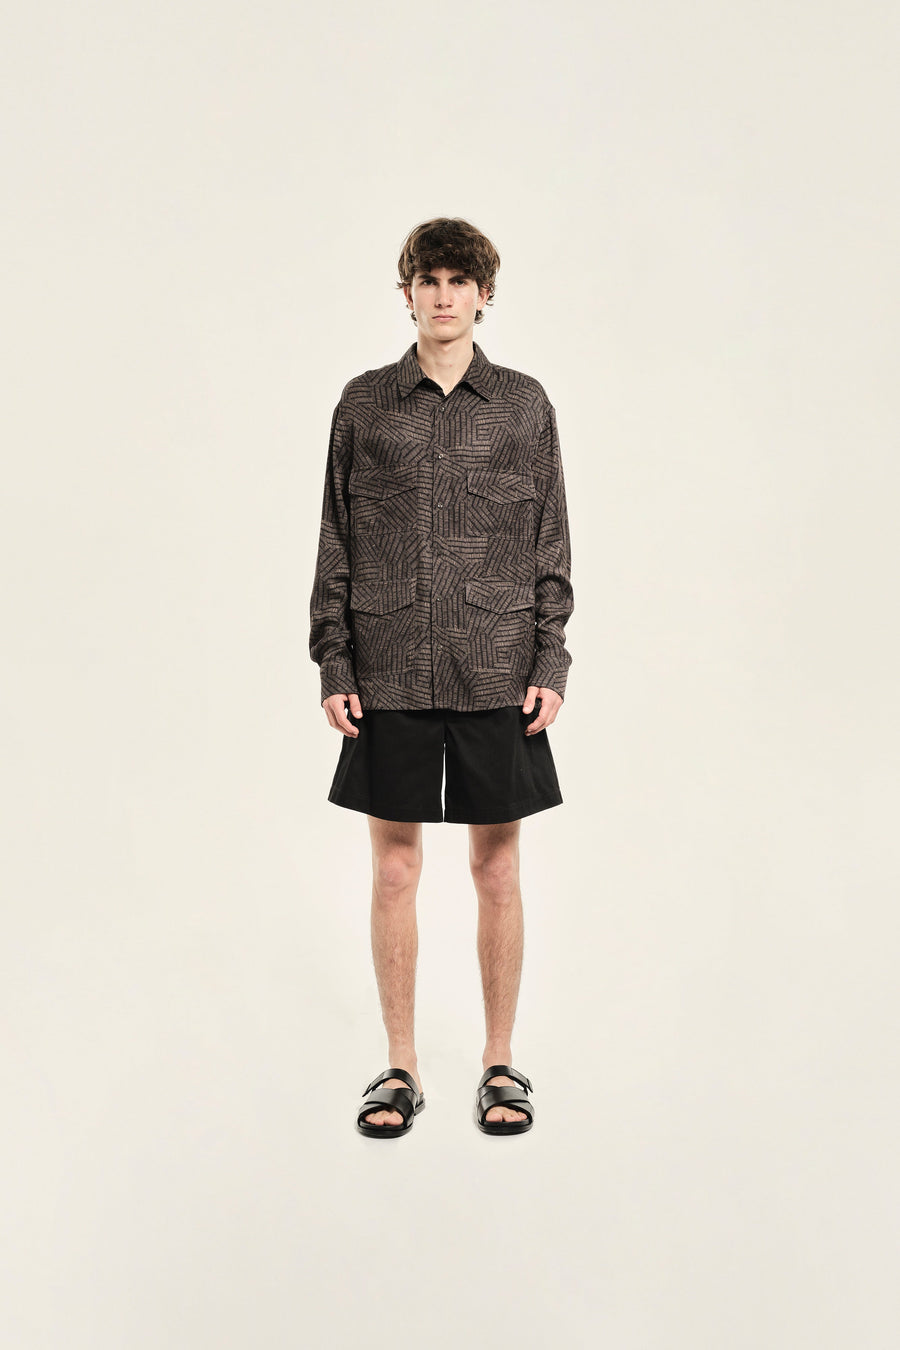 THOMAS - Long sleeve printed shirt with patch pockets